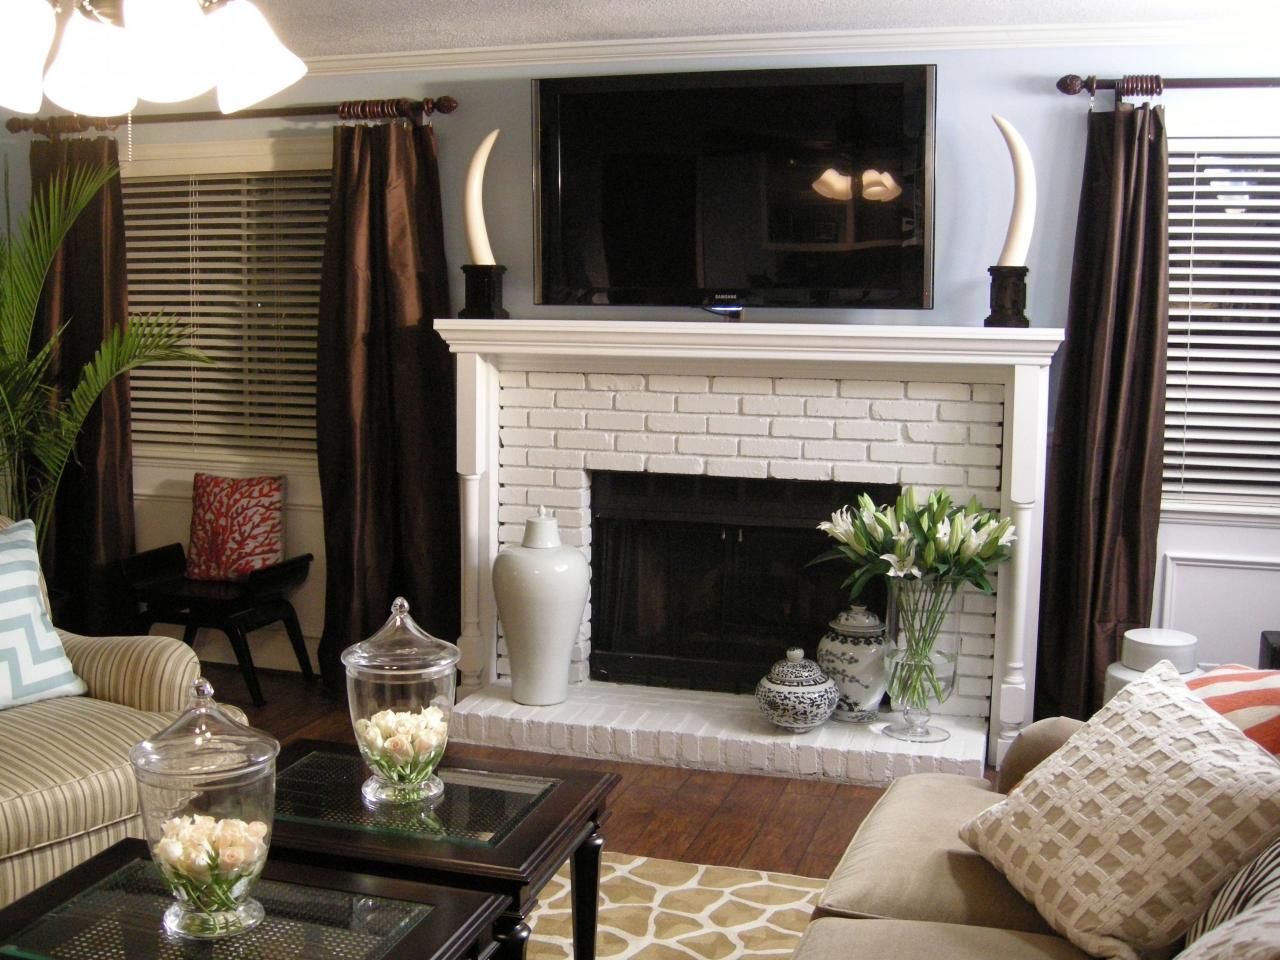 Learn how to give your dated fireplace a makeover with the addition of staircase posts